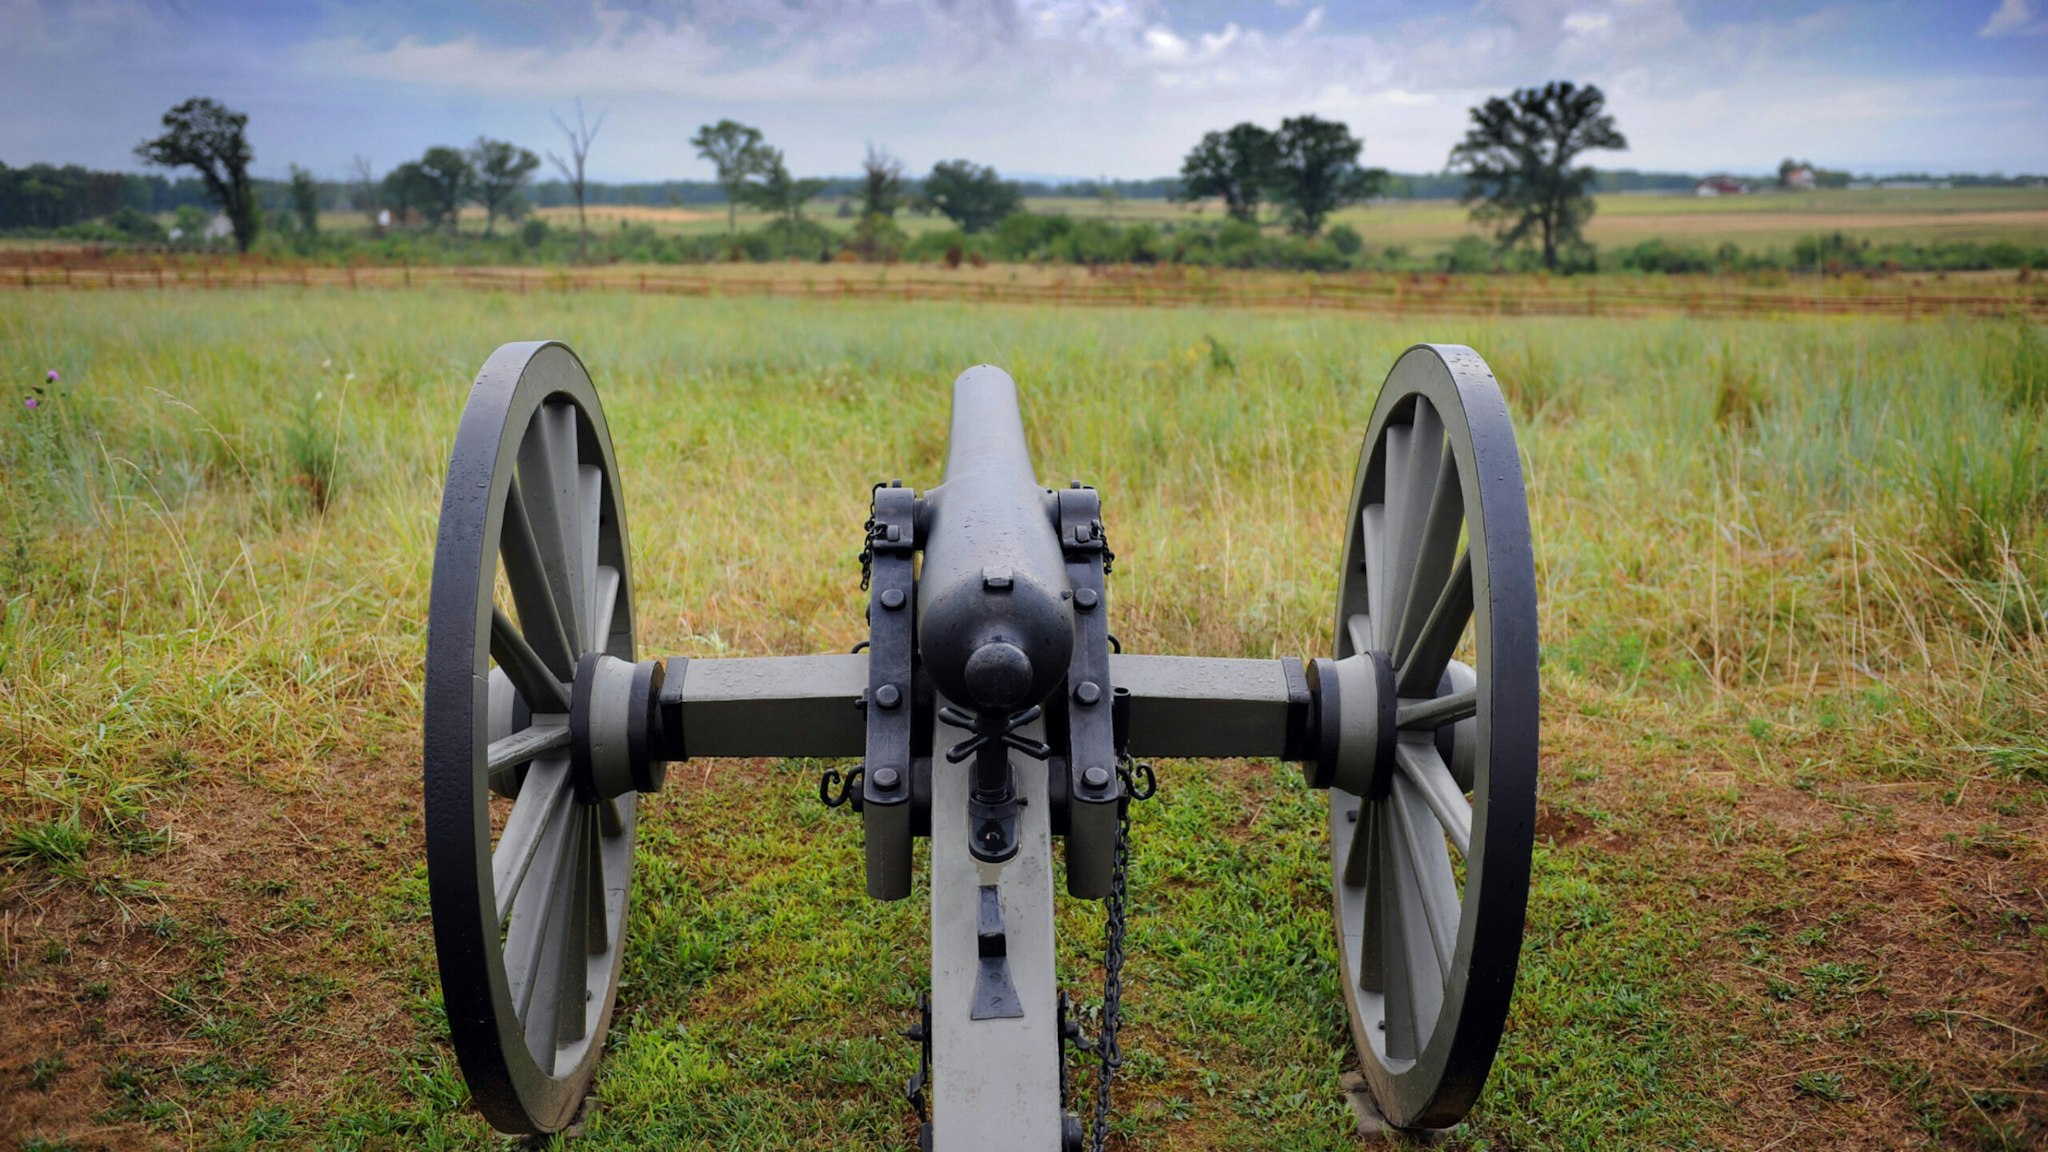 A restored canon at a Union position along Cemetery Ridge points toward the battlefield on August 13, 2010 at the Gettysburg National Military Park in Gettysburg Pennsylvania.